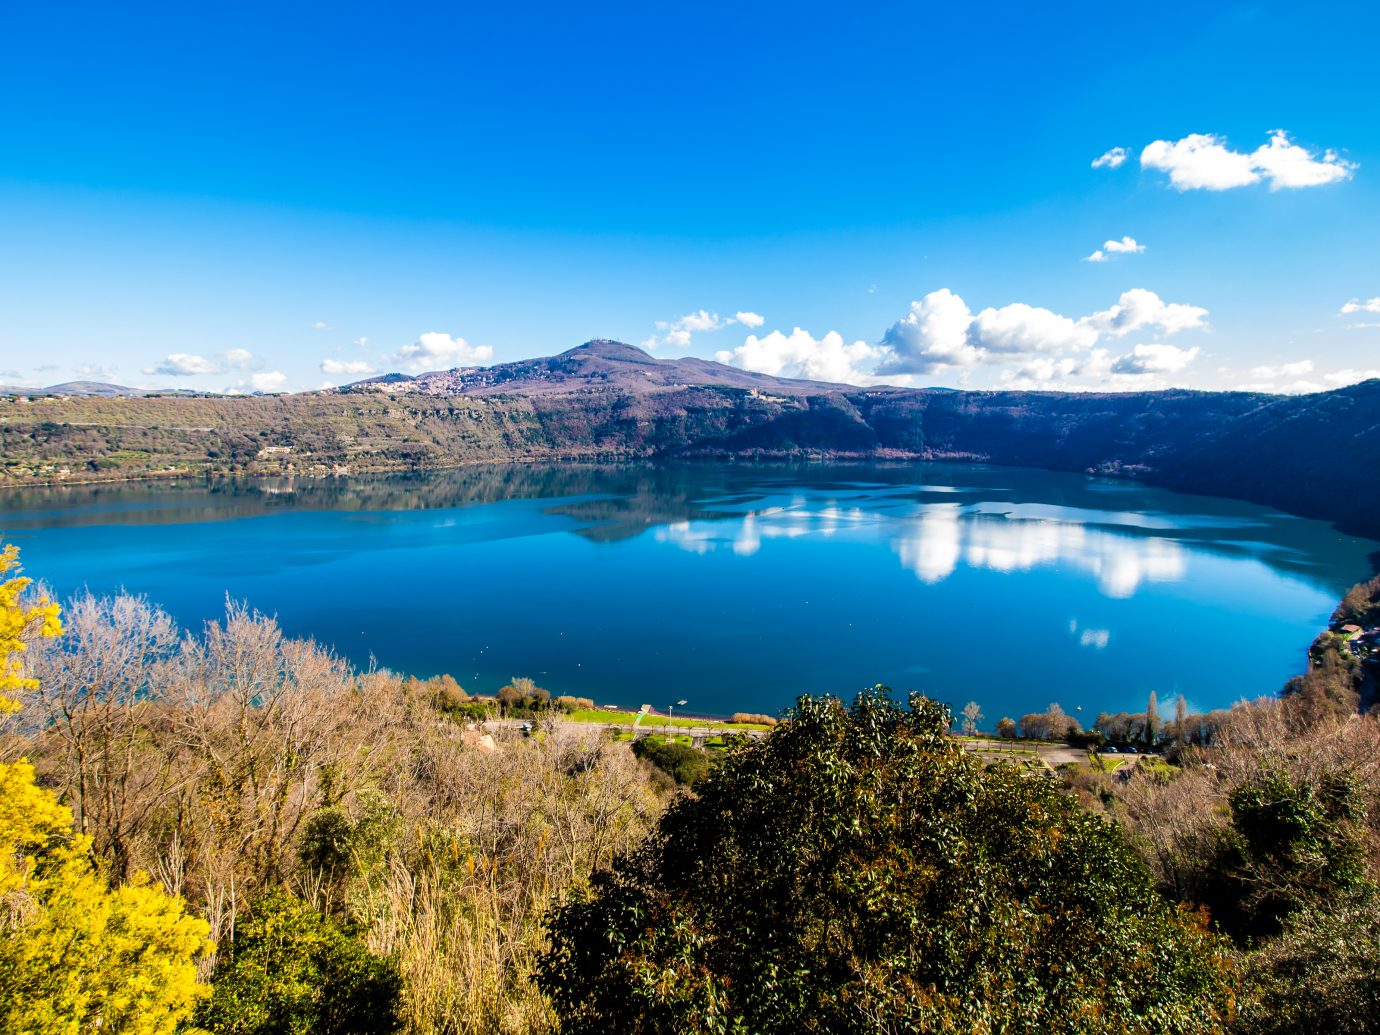 Lake Albano, a small volcanic crater lake in the Alban Hills of Lazio, near Rome, Italy